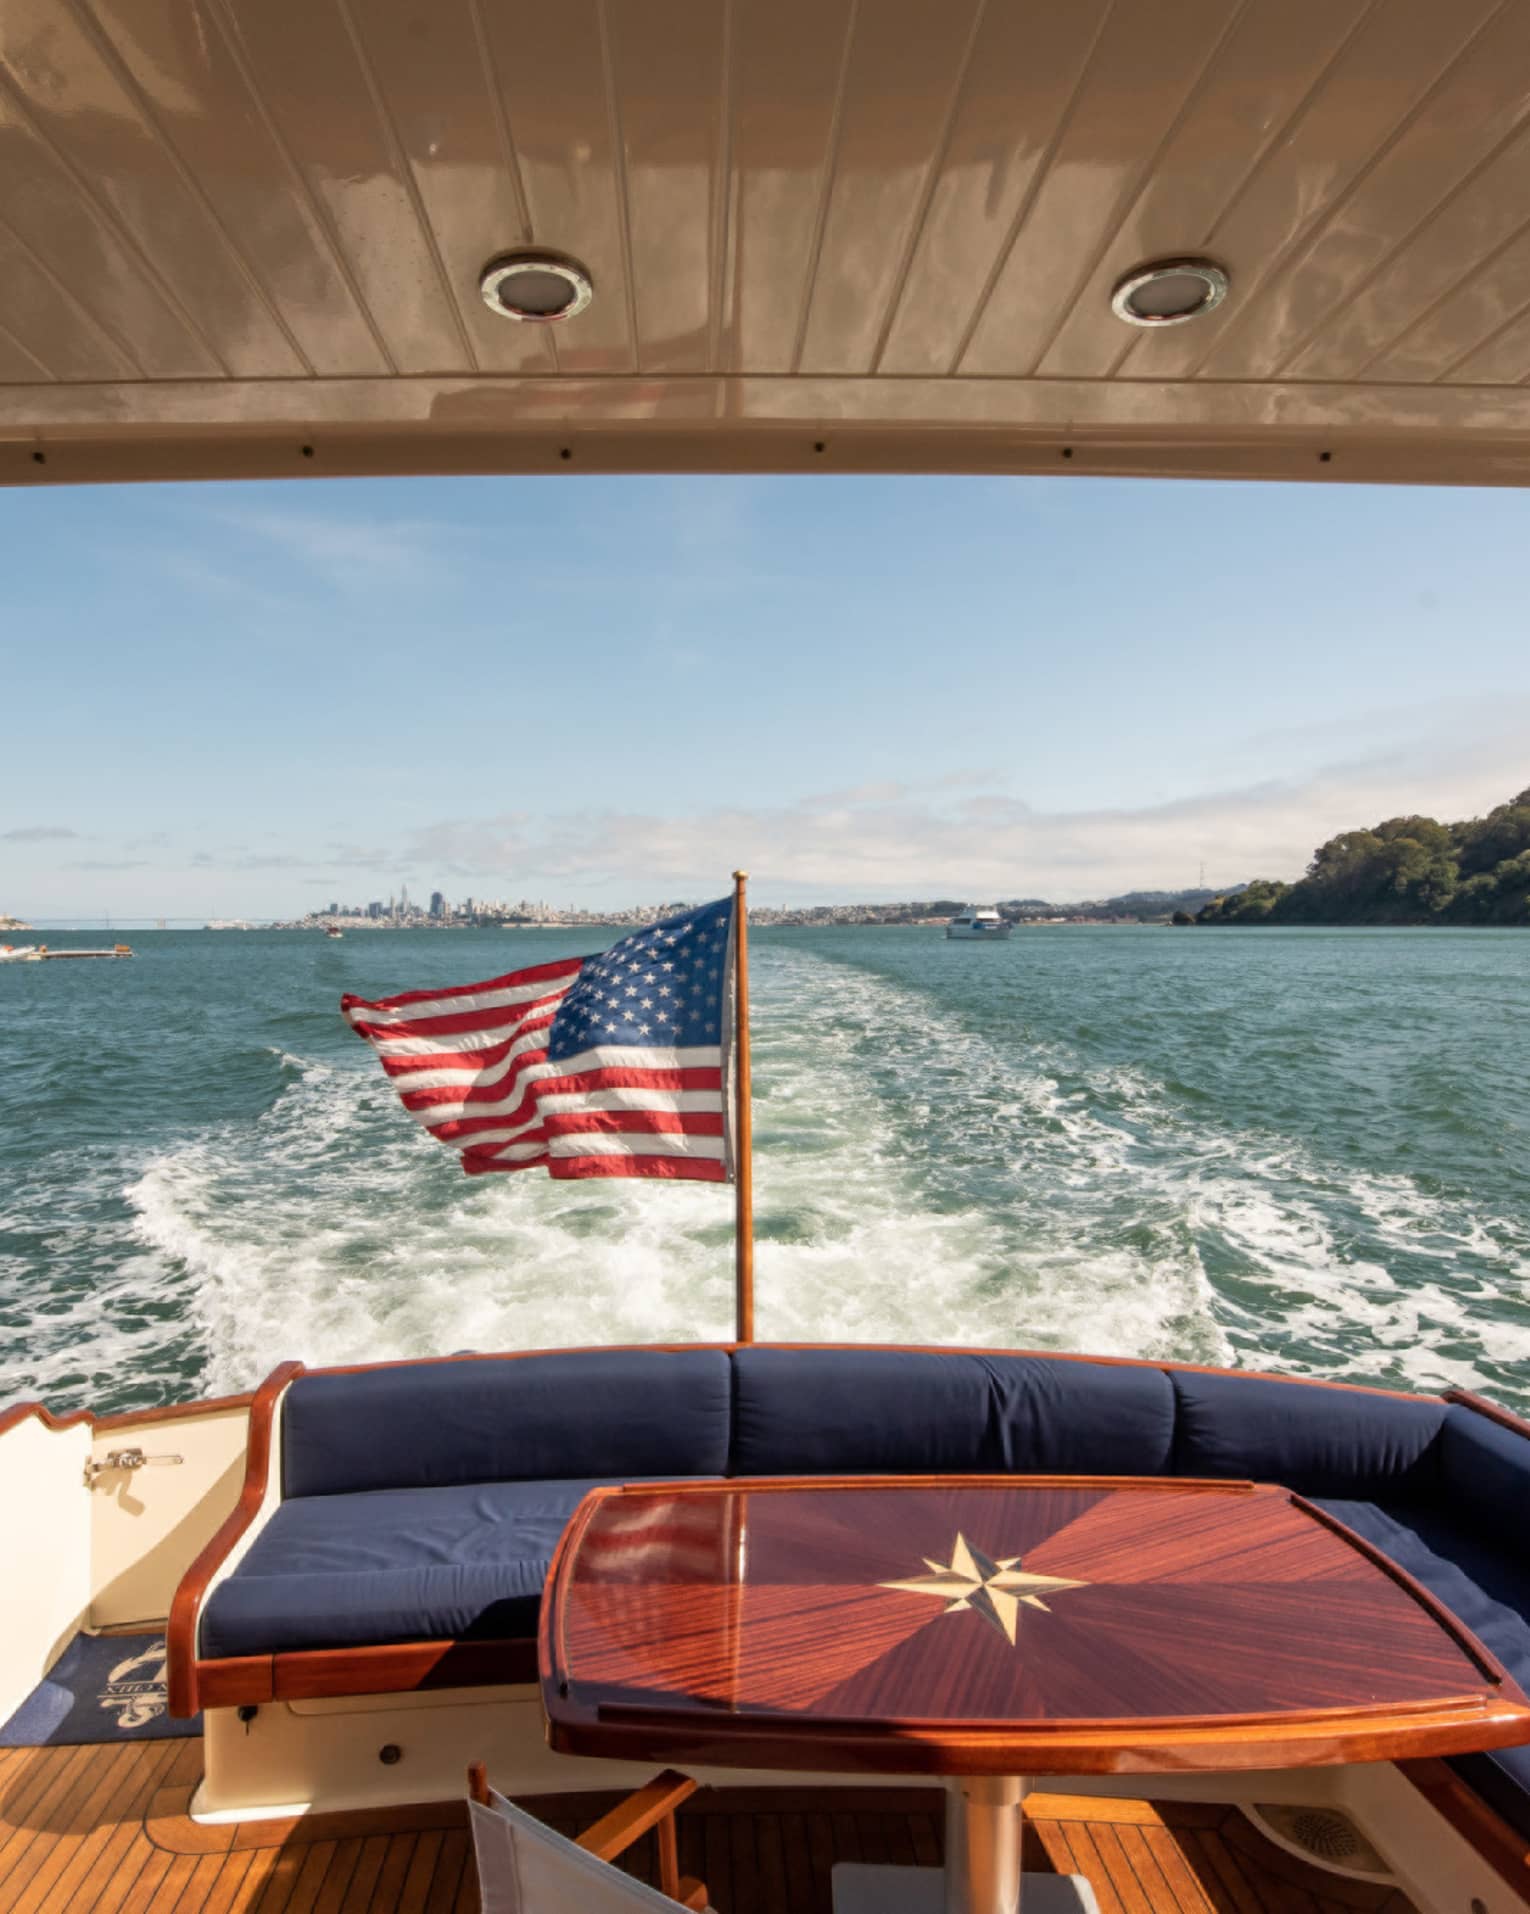 The back of a yacht, with a red table and an American flag, moving along the water.